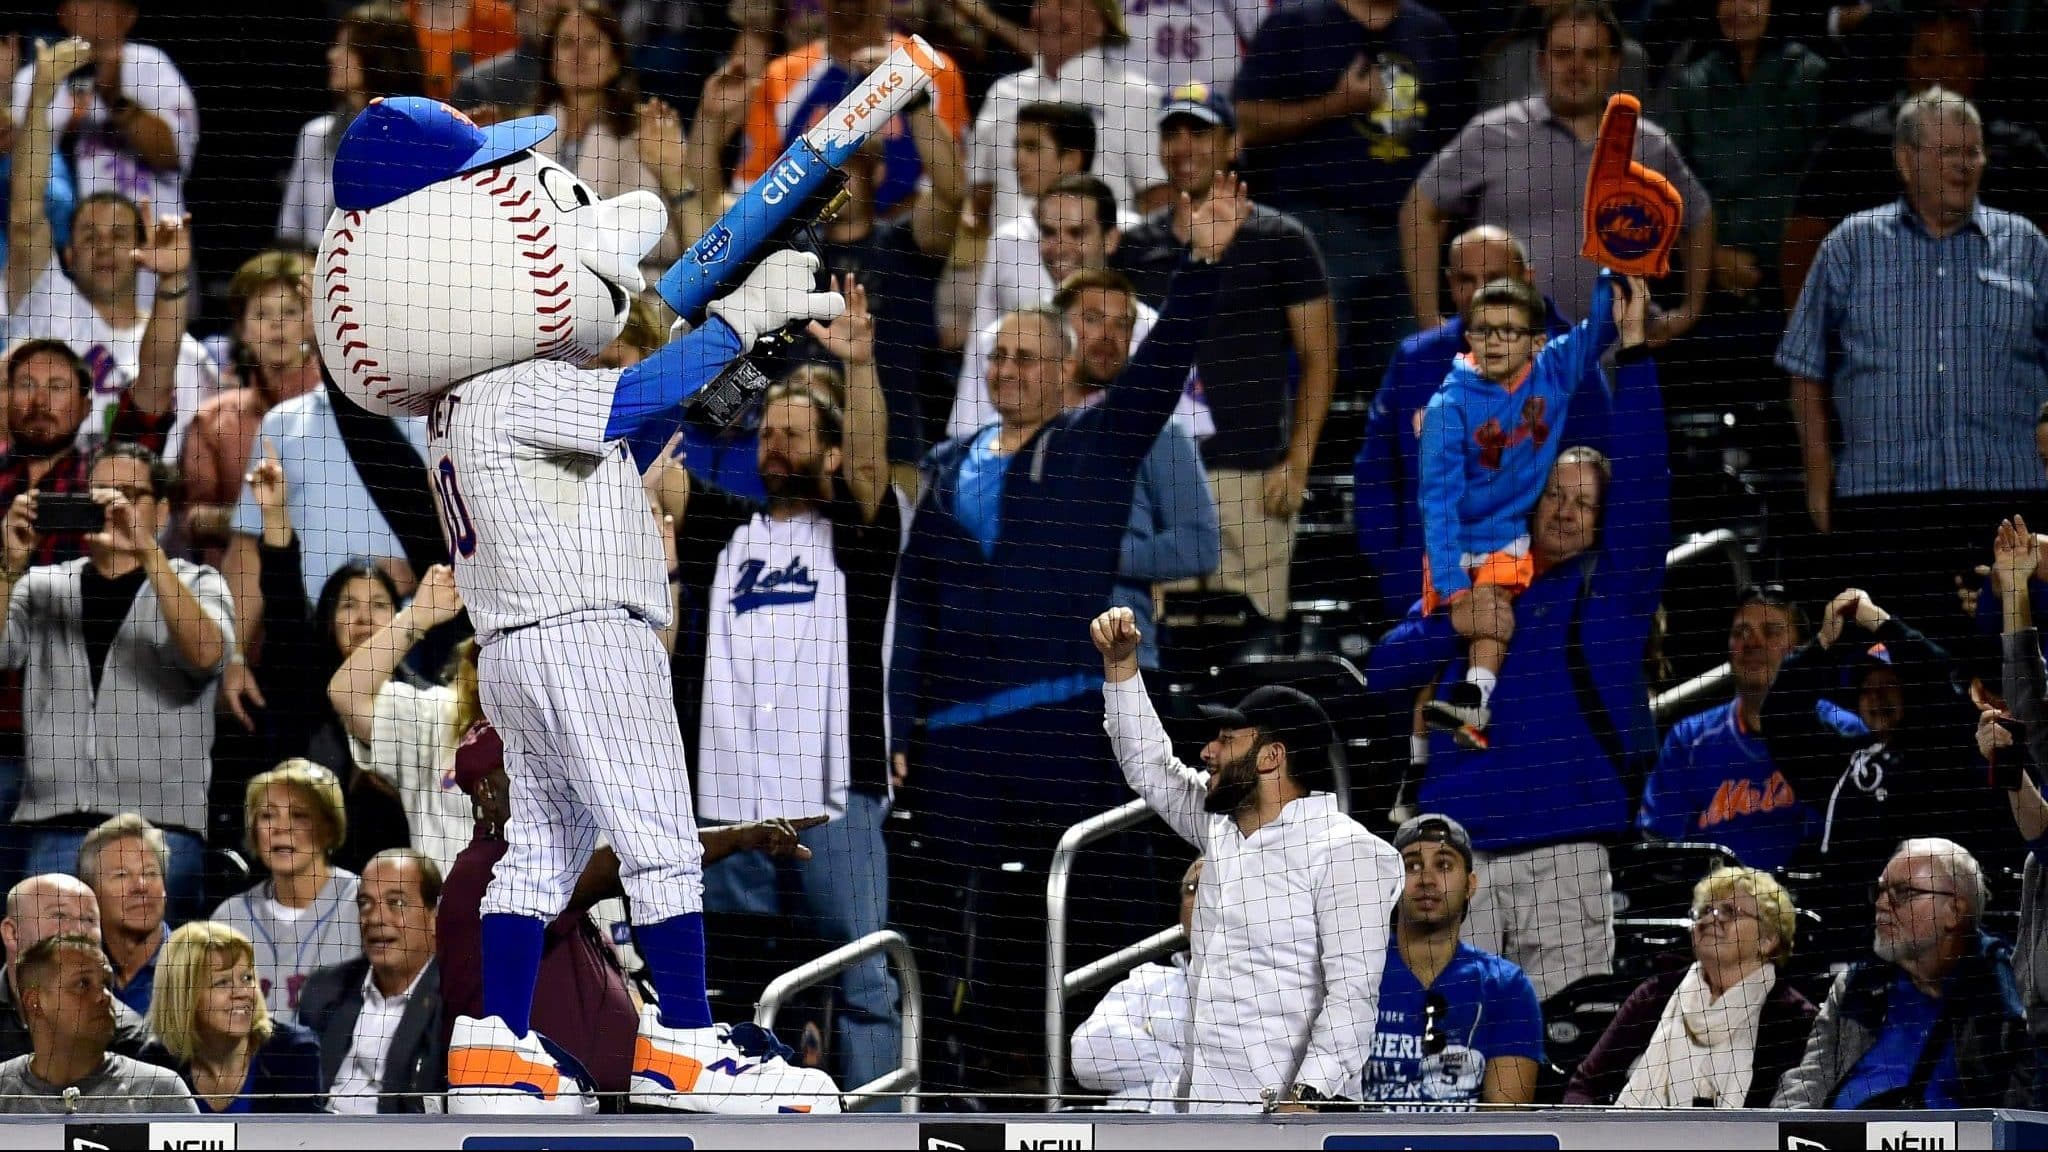 NEW YORK, NEW YORK - SEPTEMBER 24: Fans cheer as Mr. Met throws tee shirts during the New York Mets and Miami Marlins game at Citi Field on September 24, 2019 in the Flushing neighborhood of the Queens borough of New York City.